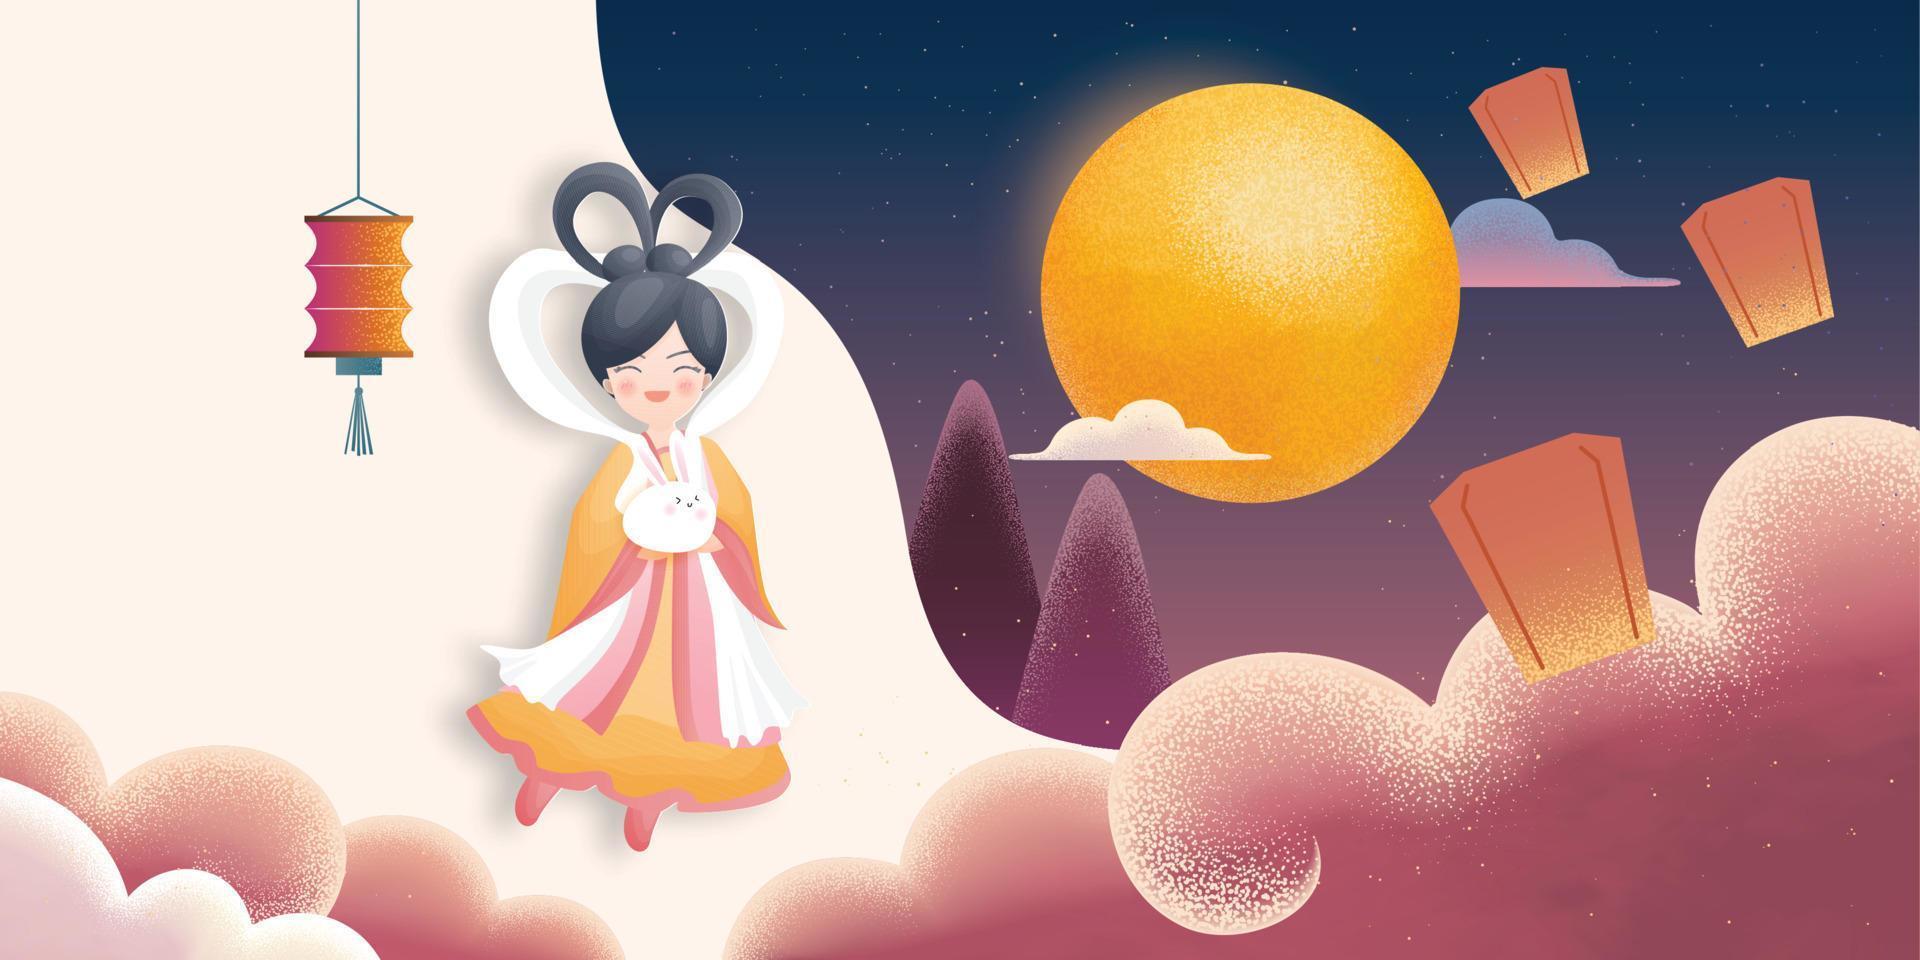 Happy mid autumn festival with beautiful lotus and girl holding bunny vector